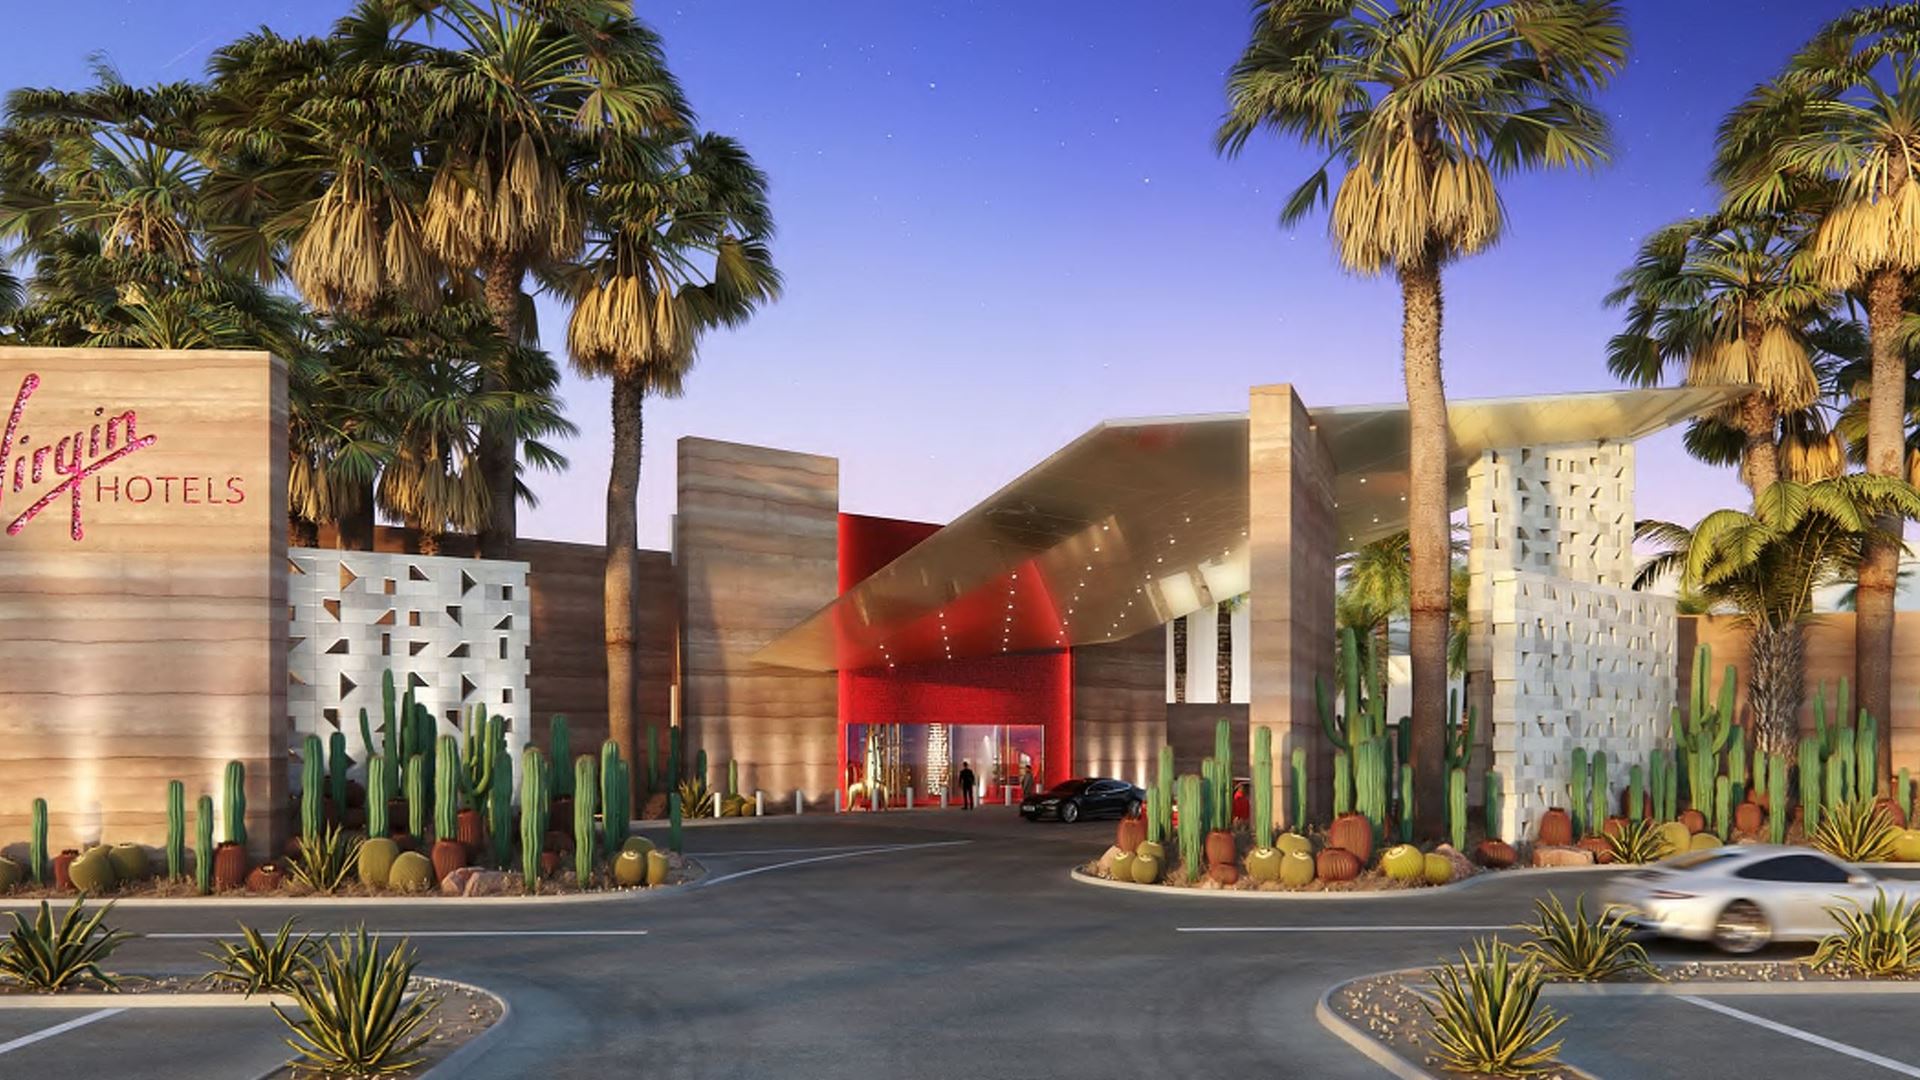 Mandalay Bay Convention Center: Corporate Events Reimagined